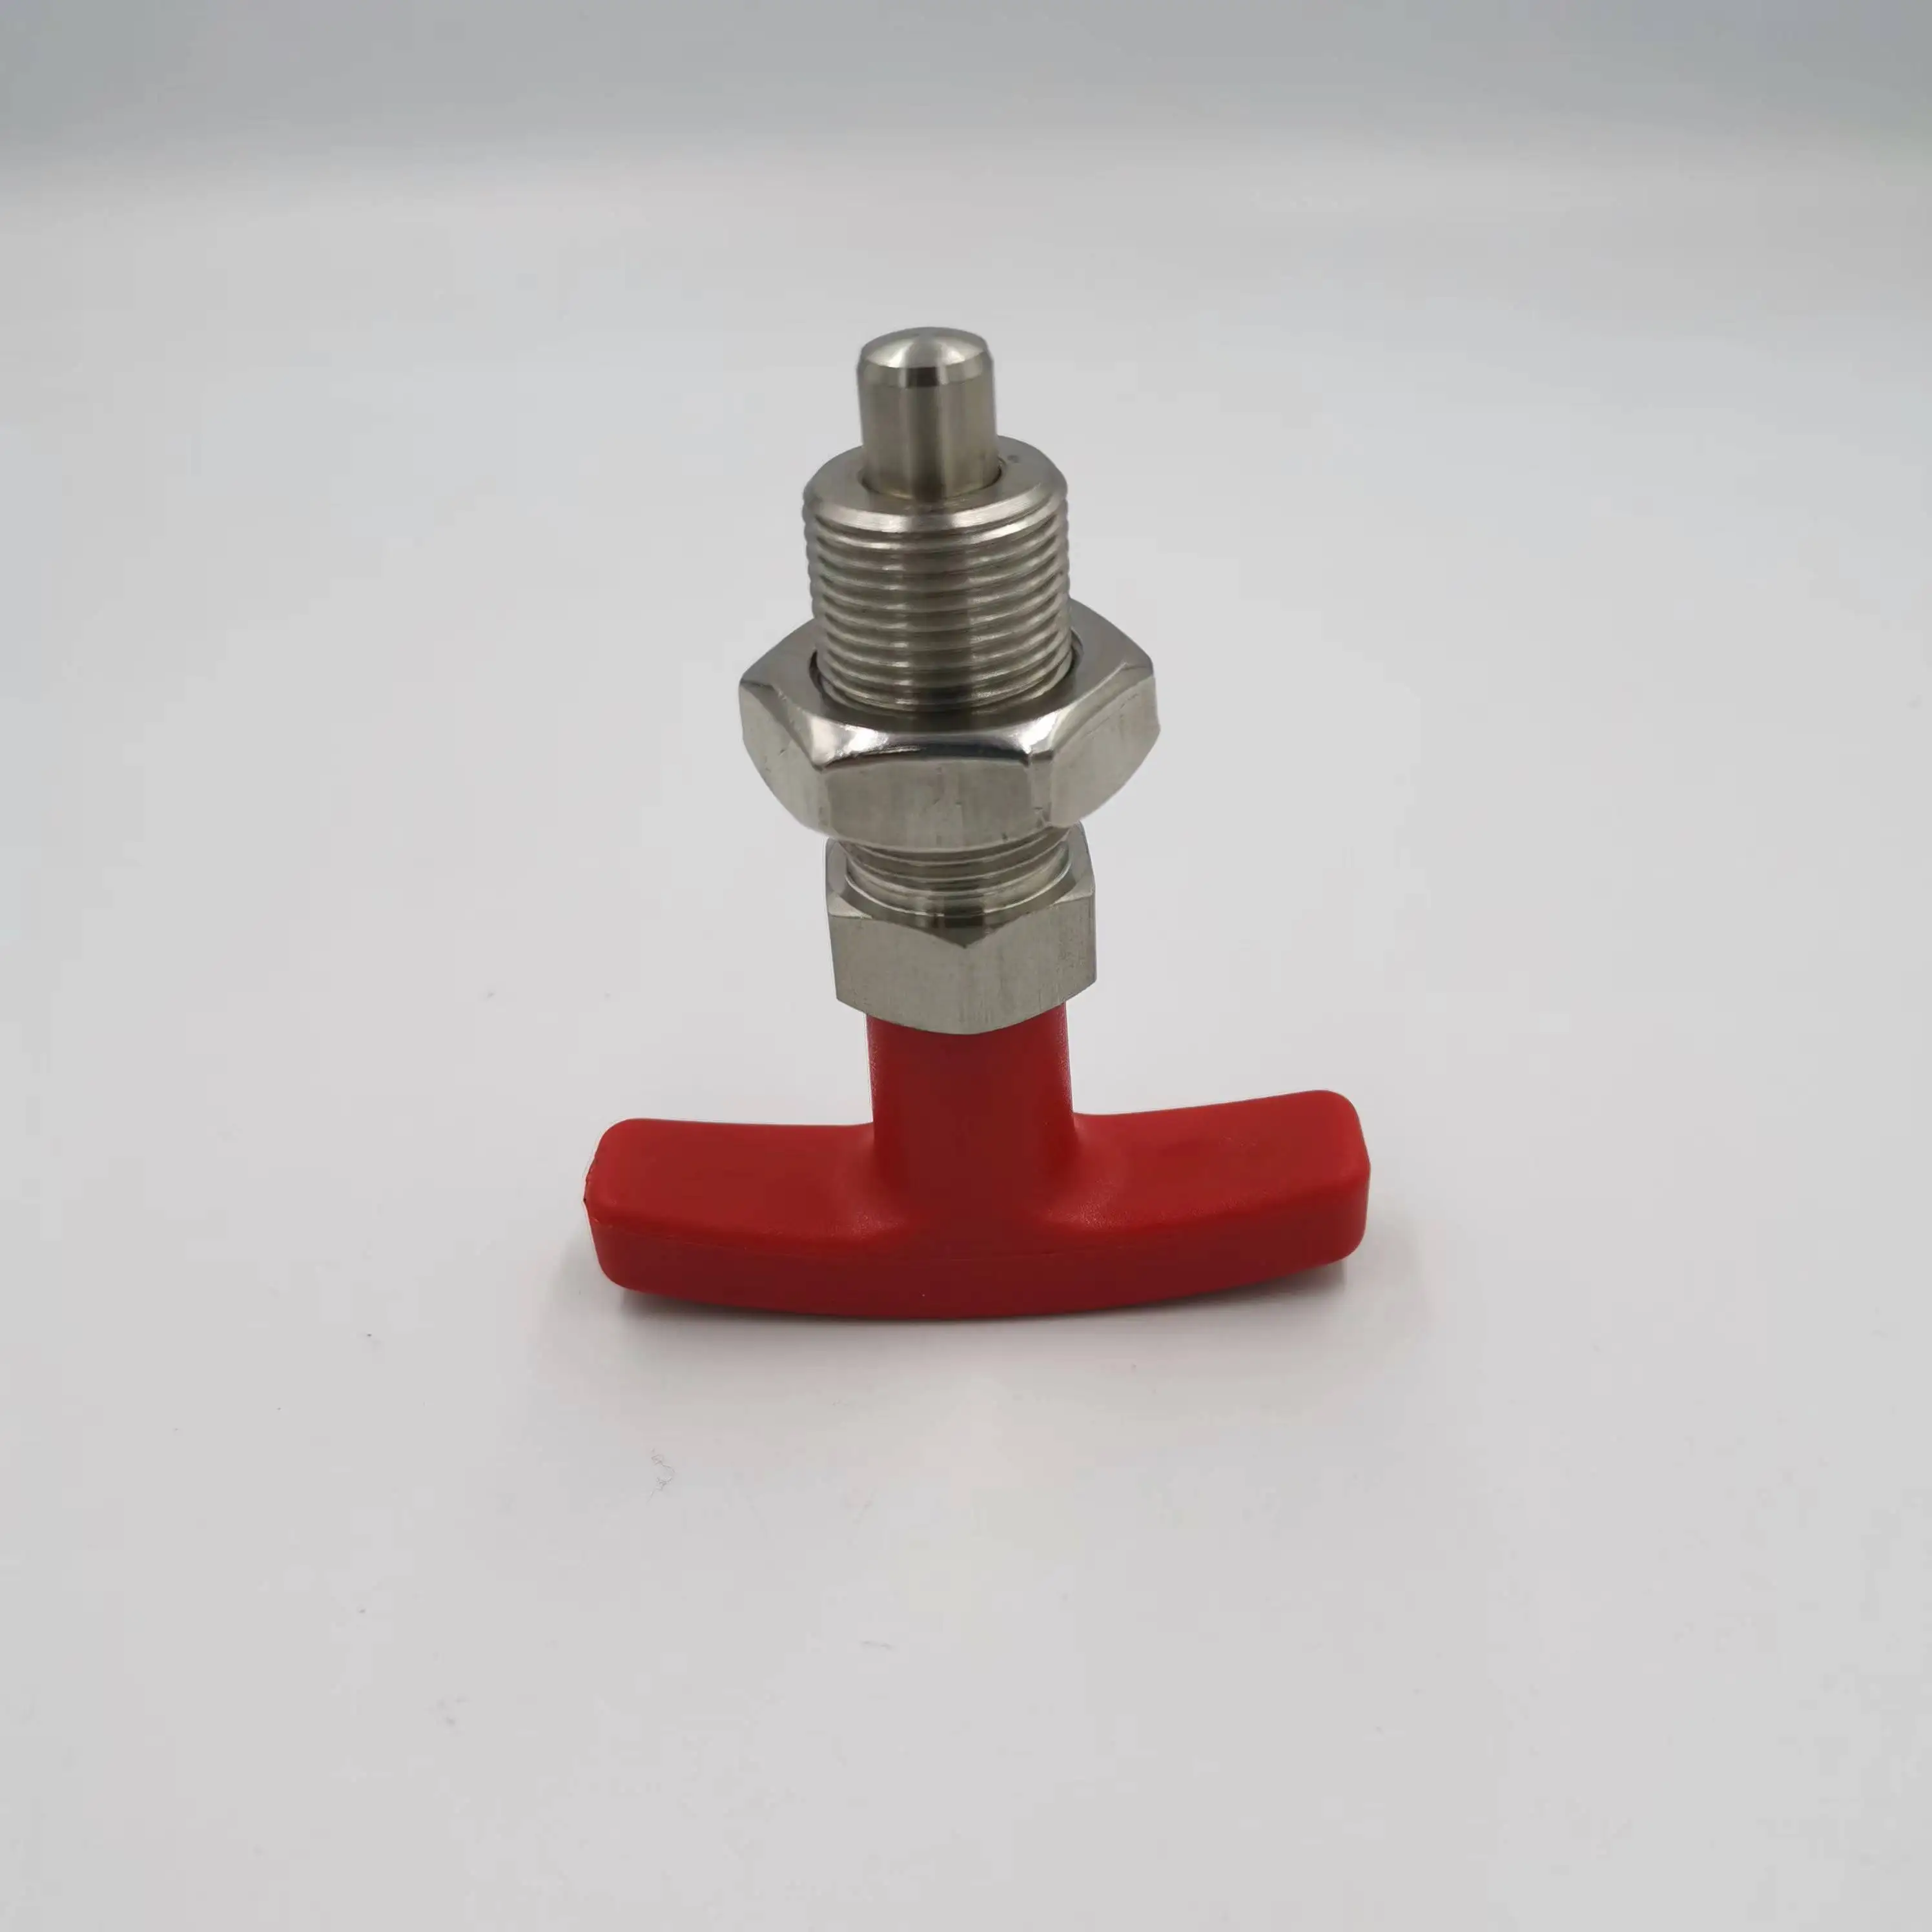 Stainless steel T grip handle clamping Indexing plunger